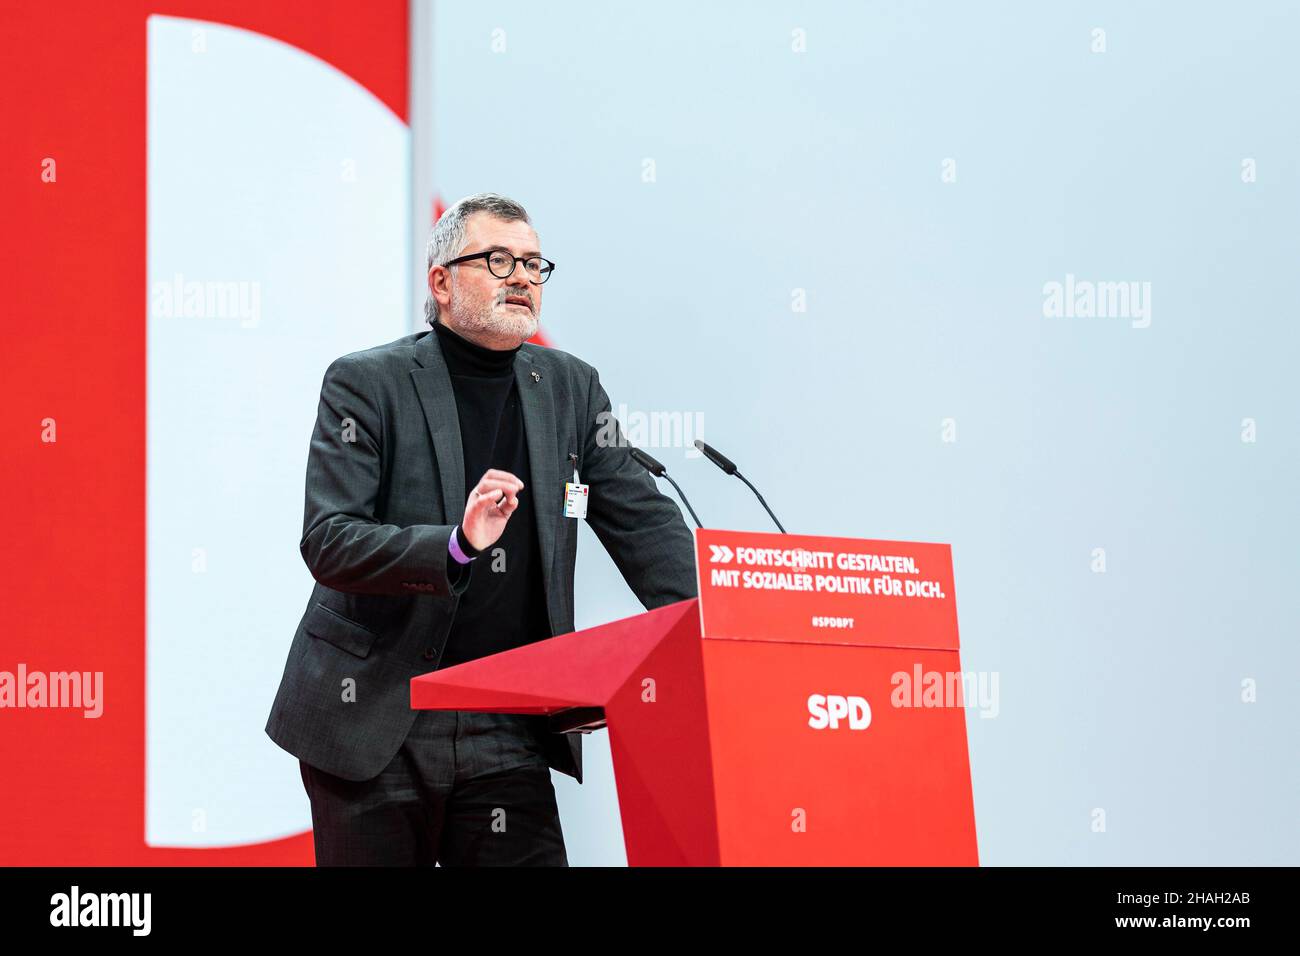 Dietmar Nietan, treasurer of the SPD, recorded as part of the SPD federal party conference in Berlin, December 11, 2021. At this party congress three days after the new federal government was sworn in, the SPD is looking for a new federal chairman to replace the outgoing chairman Norbert Walter-Borjans in office. Copyright: Florian Gaertner/photothek.de Stock Photo